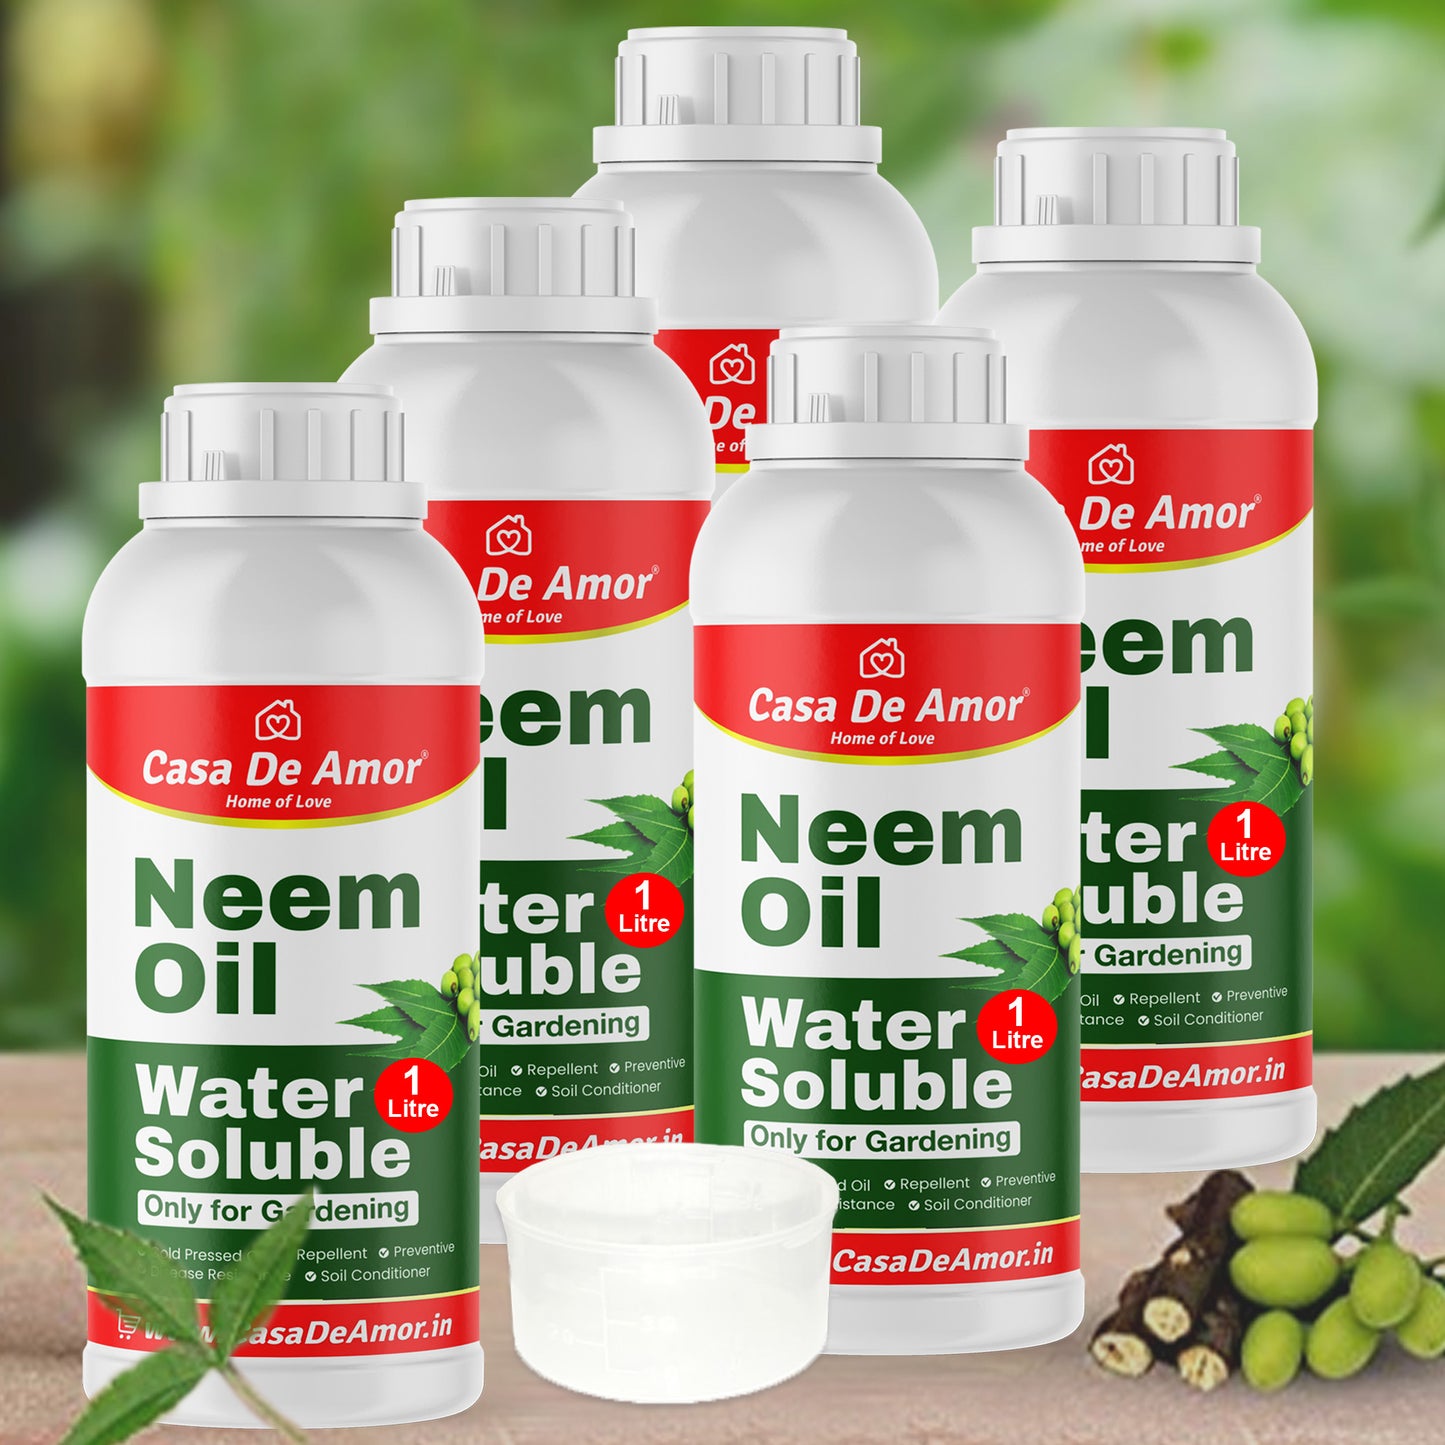 Casa De Amor Organic Cold Pressed, Water Soluble, Neem Oil for Plants & Garden  with Measuring Cup